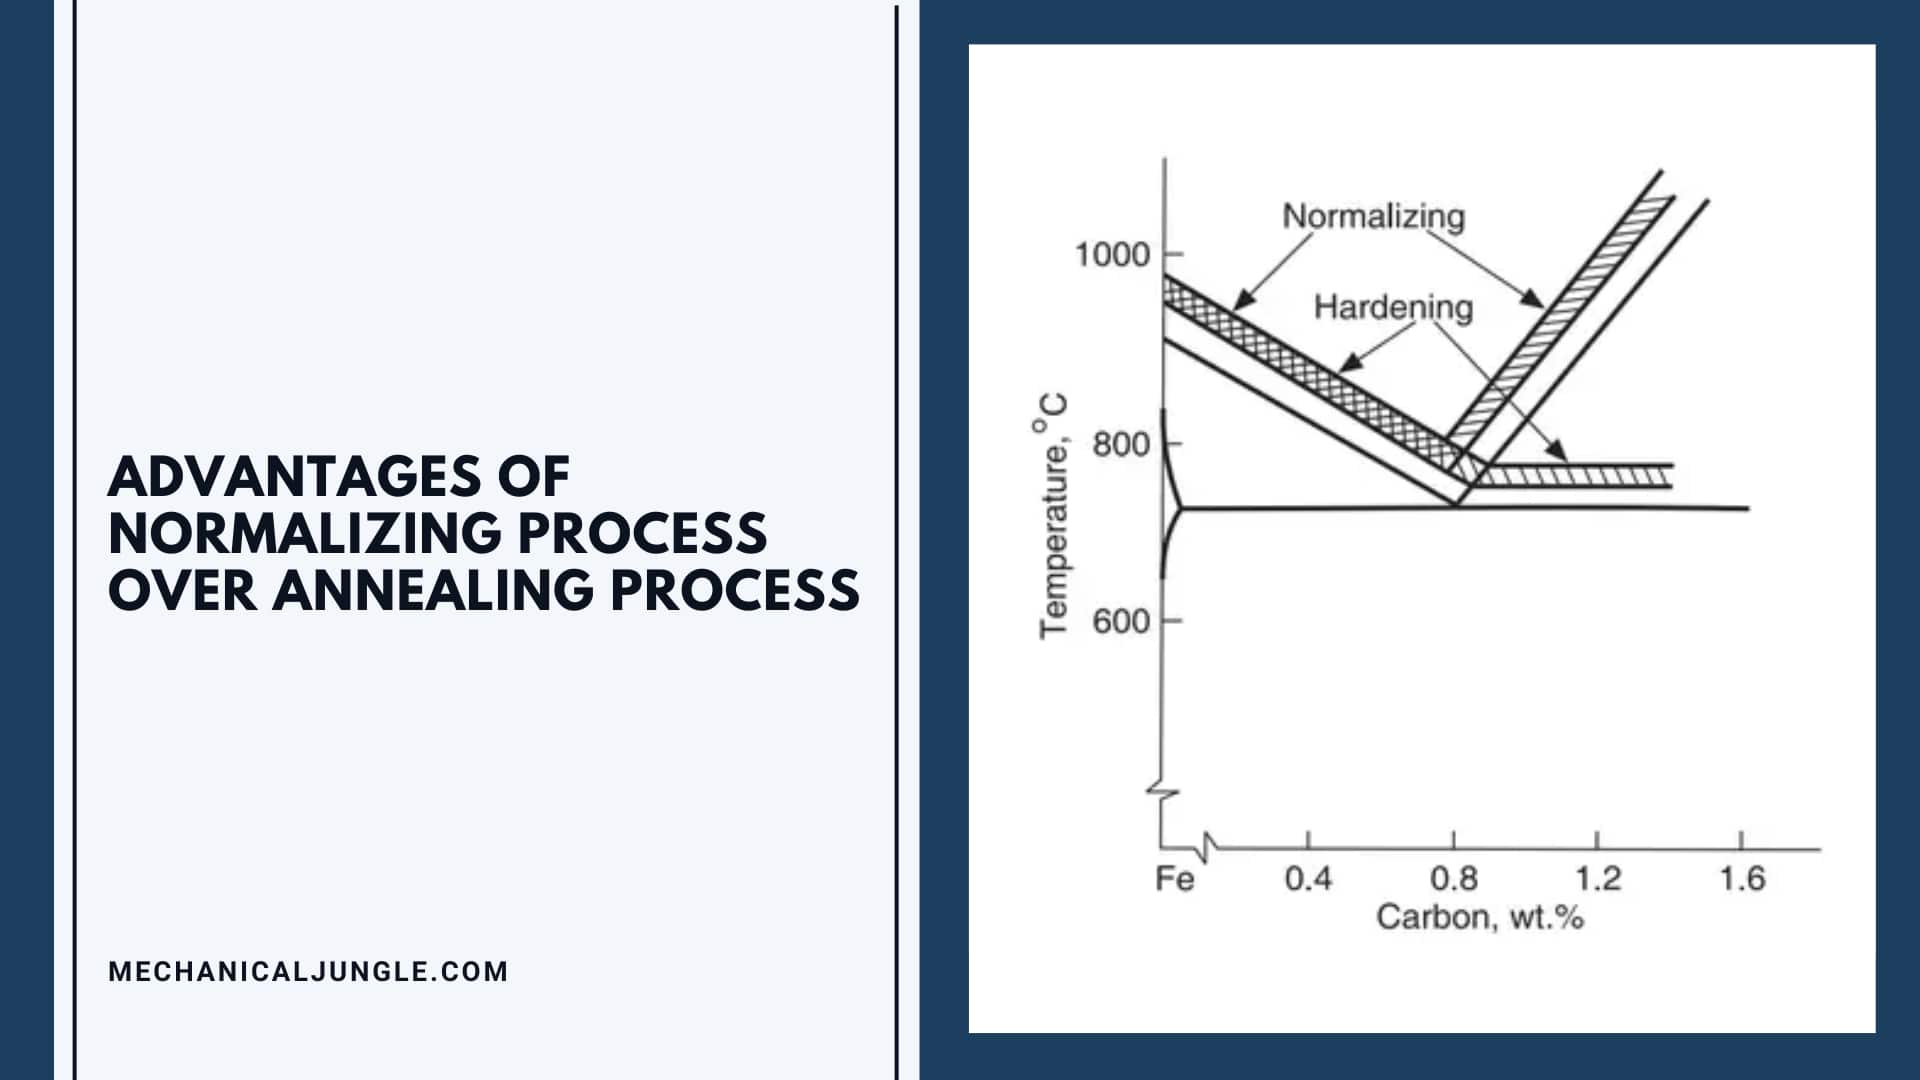 Advantages of Normalizing Process Over Annealing Process